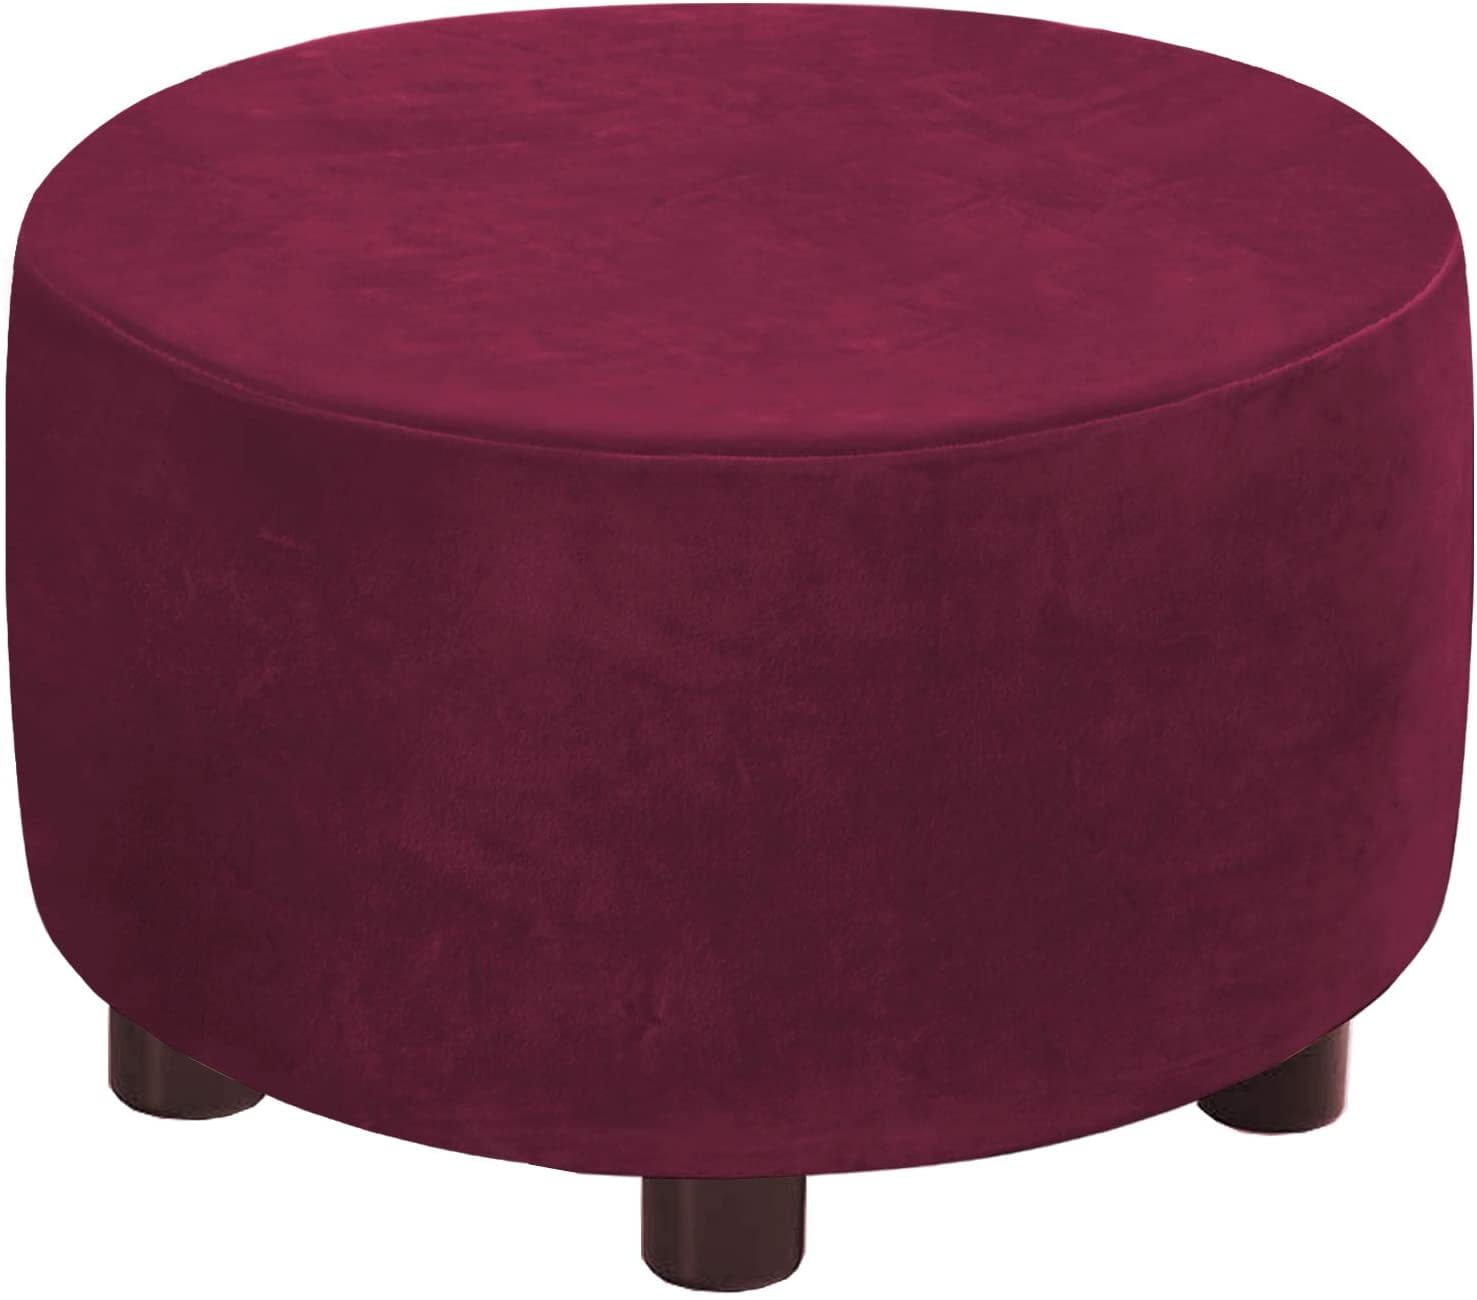 Details about   Round CubeOttoman Slipcover Footstool Footrest Cover Case Living Room Stool 